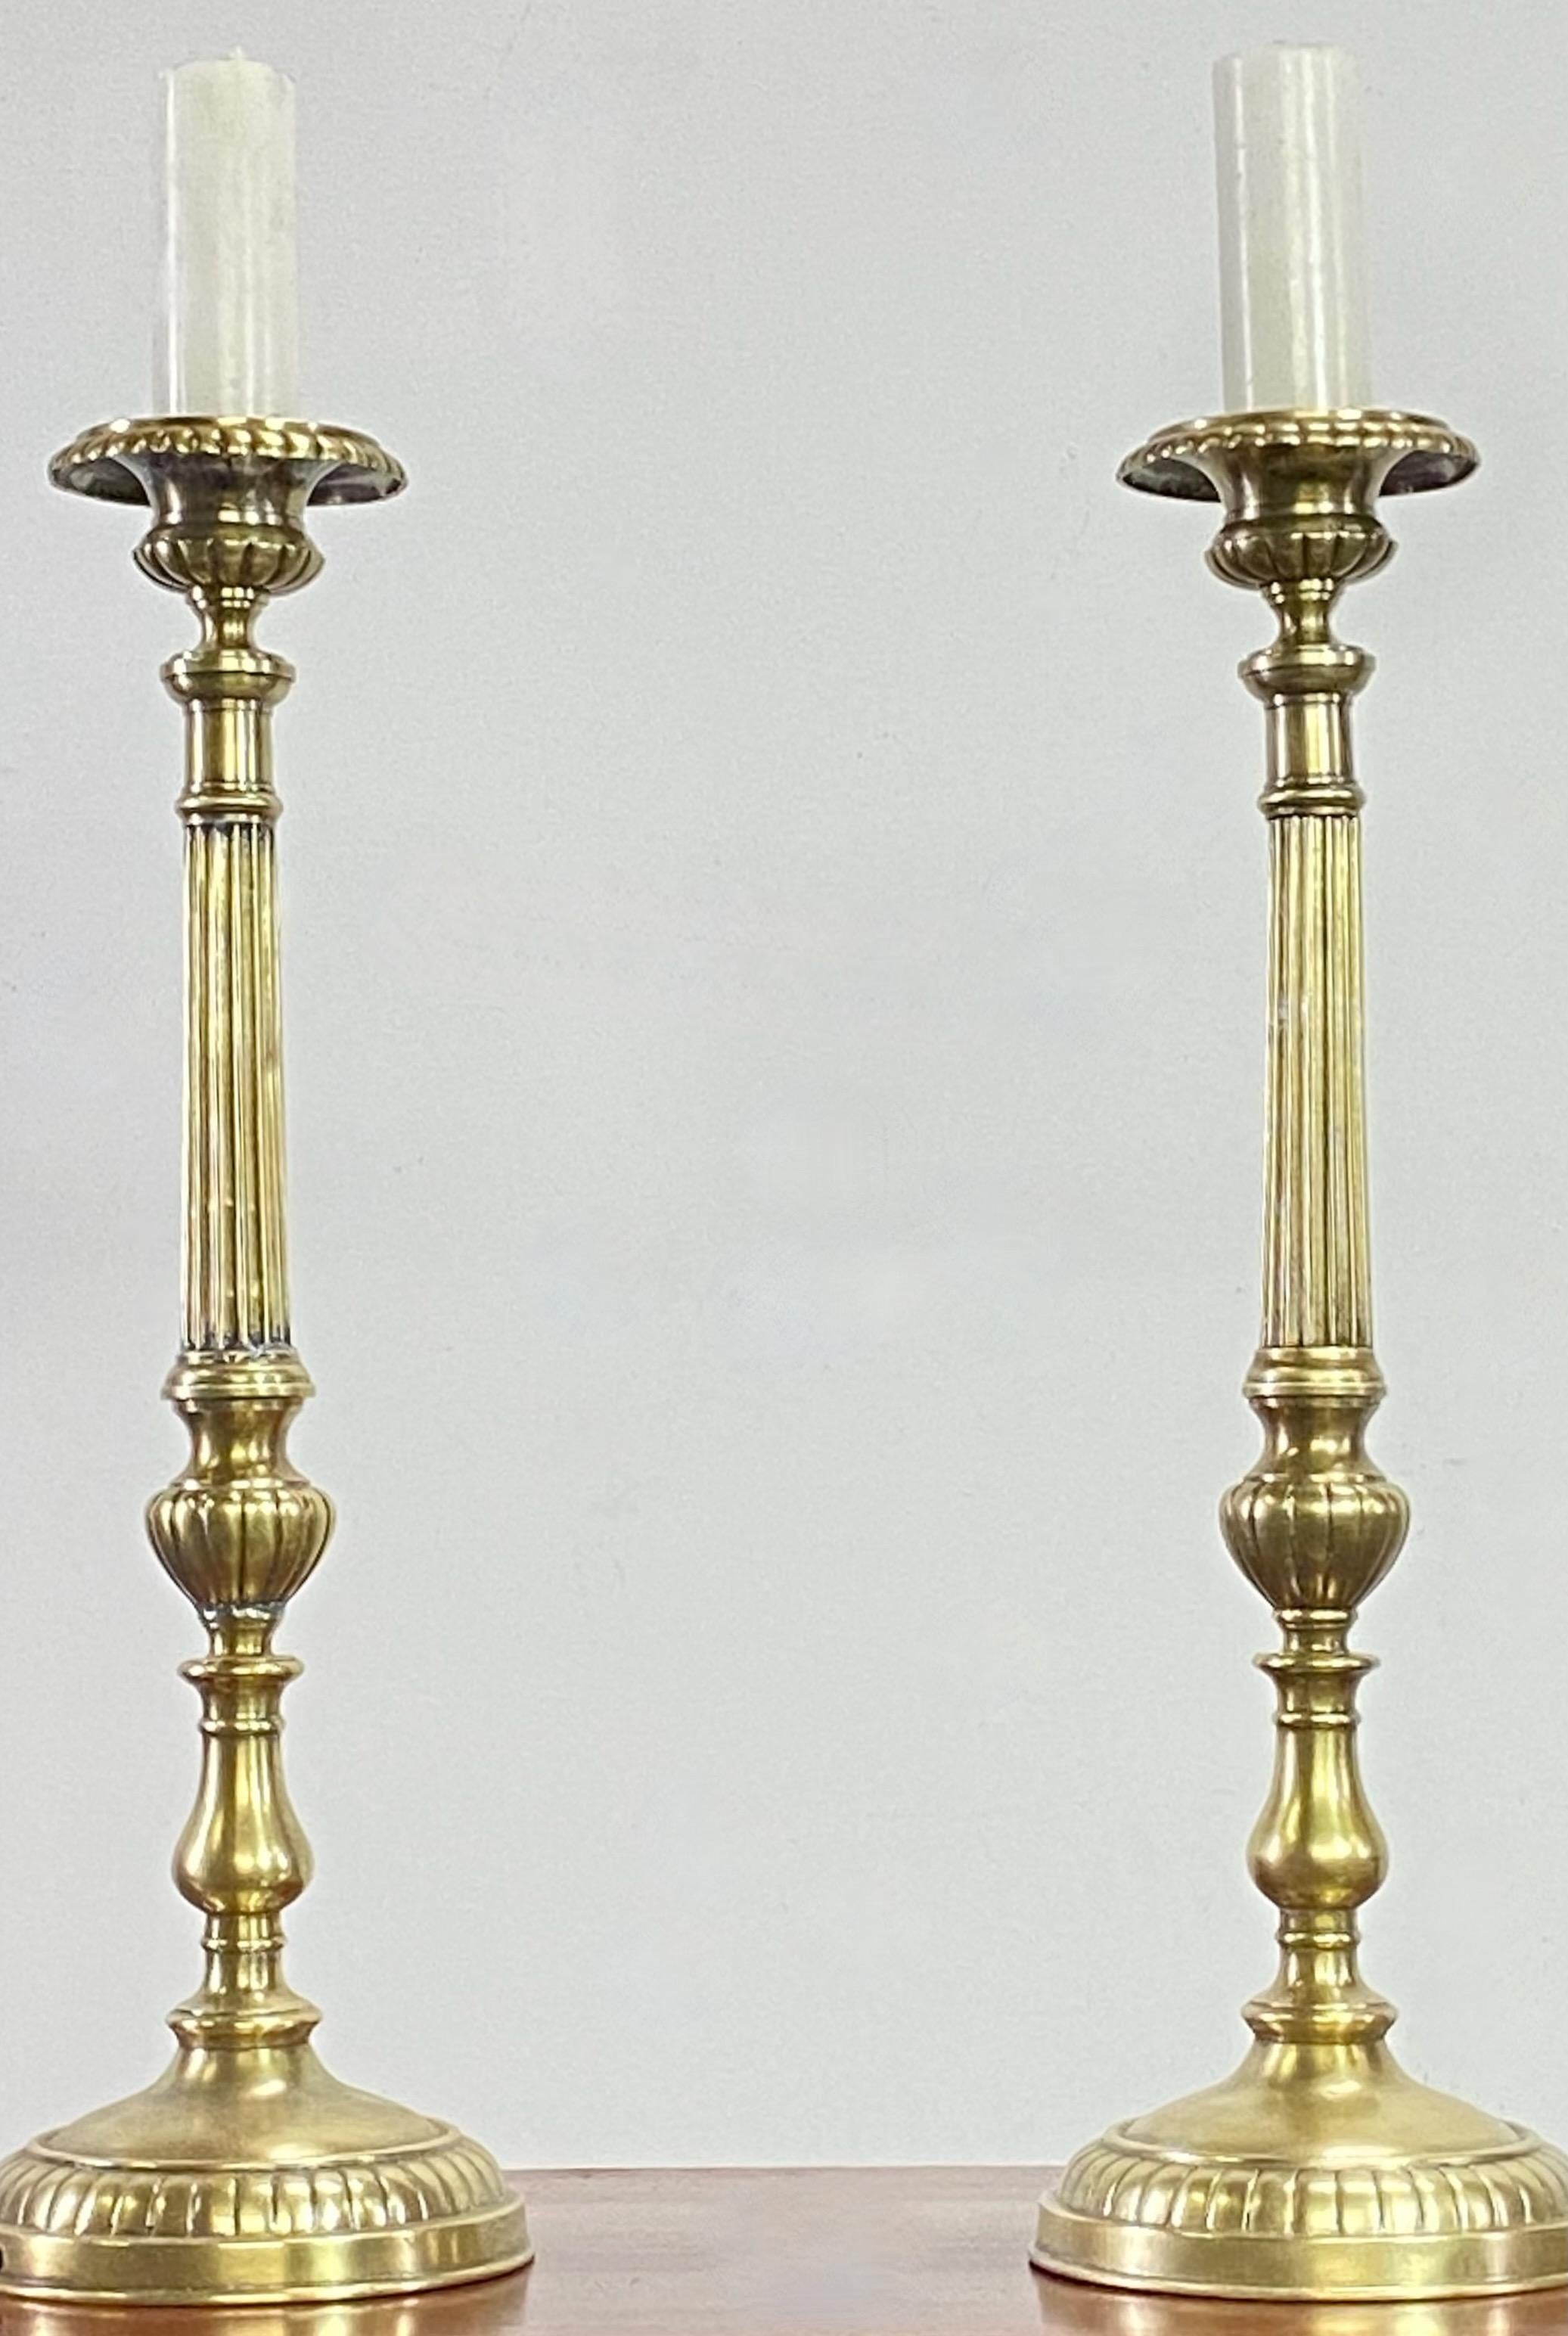 Pair of Early 19th Century European Brass Candlesticks, circa 1840 For Sale 10